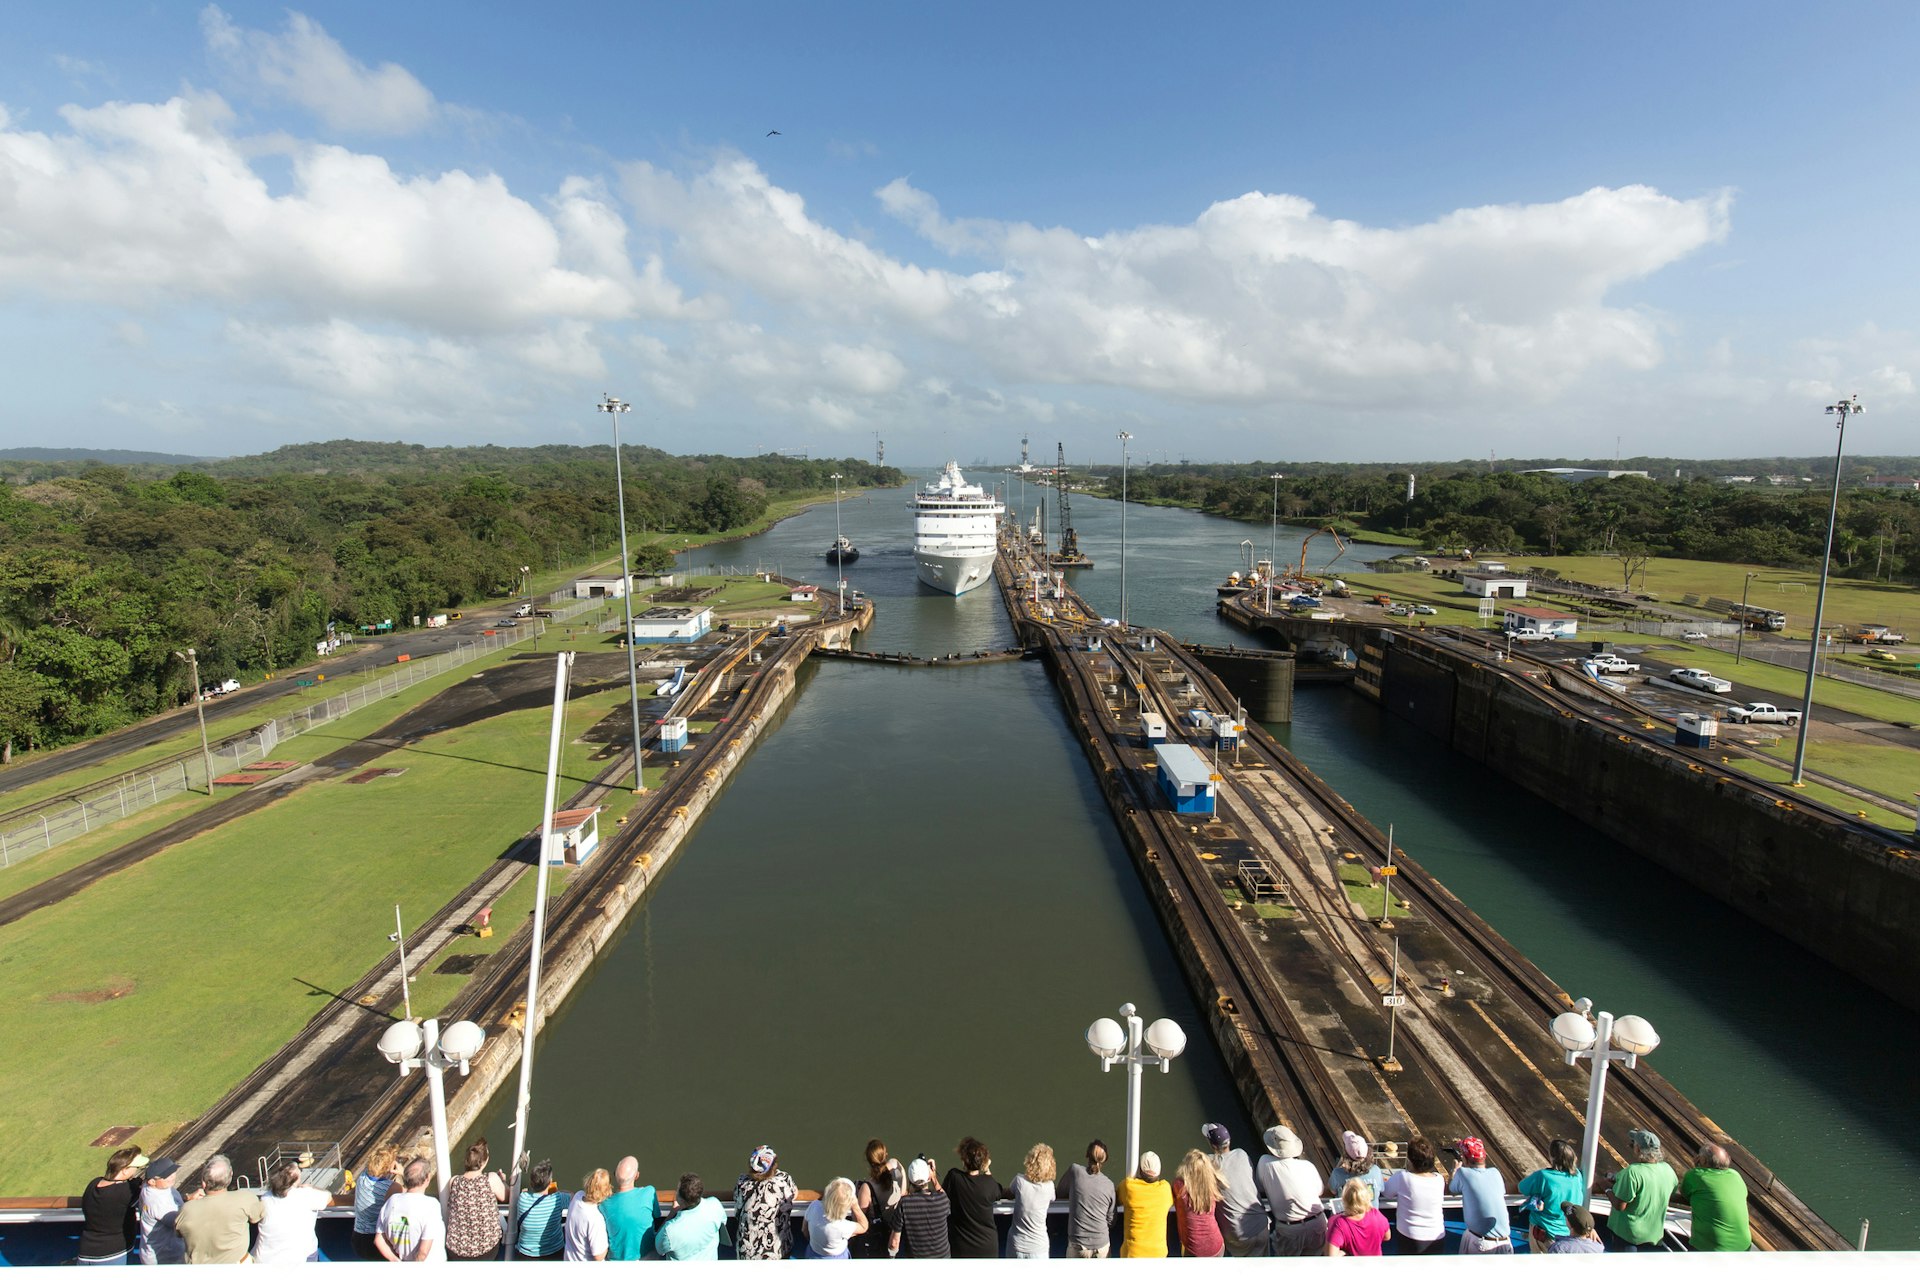 A line of people gaze at an approaching cruise ship in a narrow waterway at Panama Canal